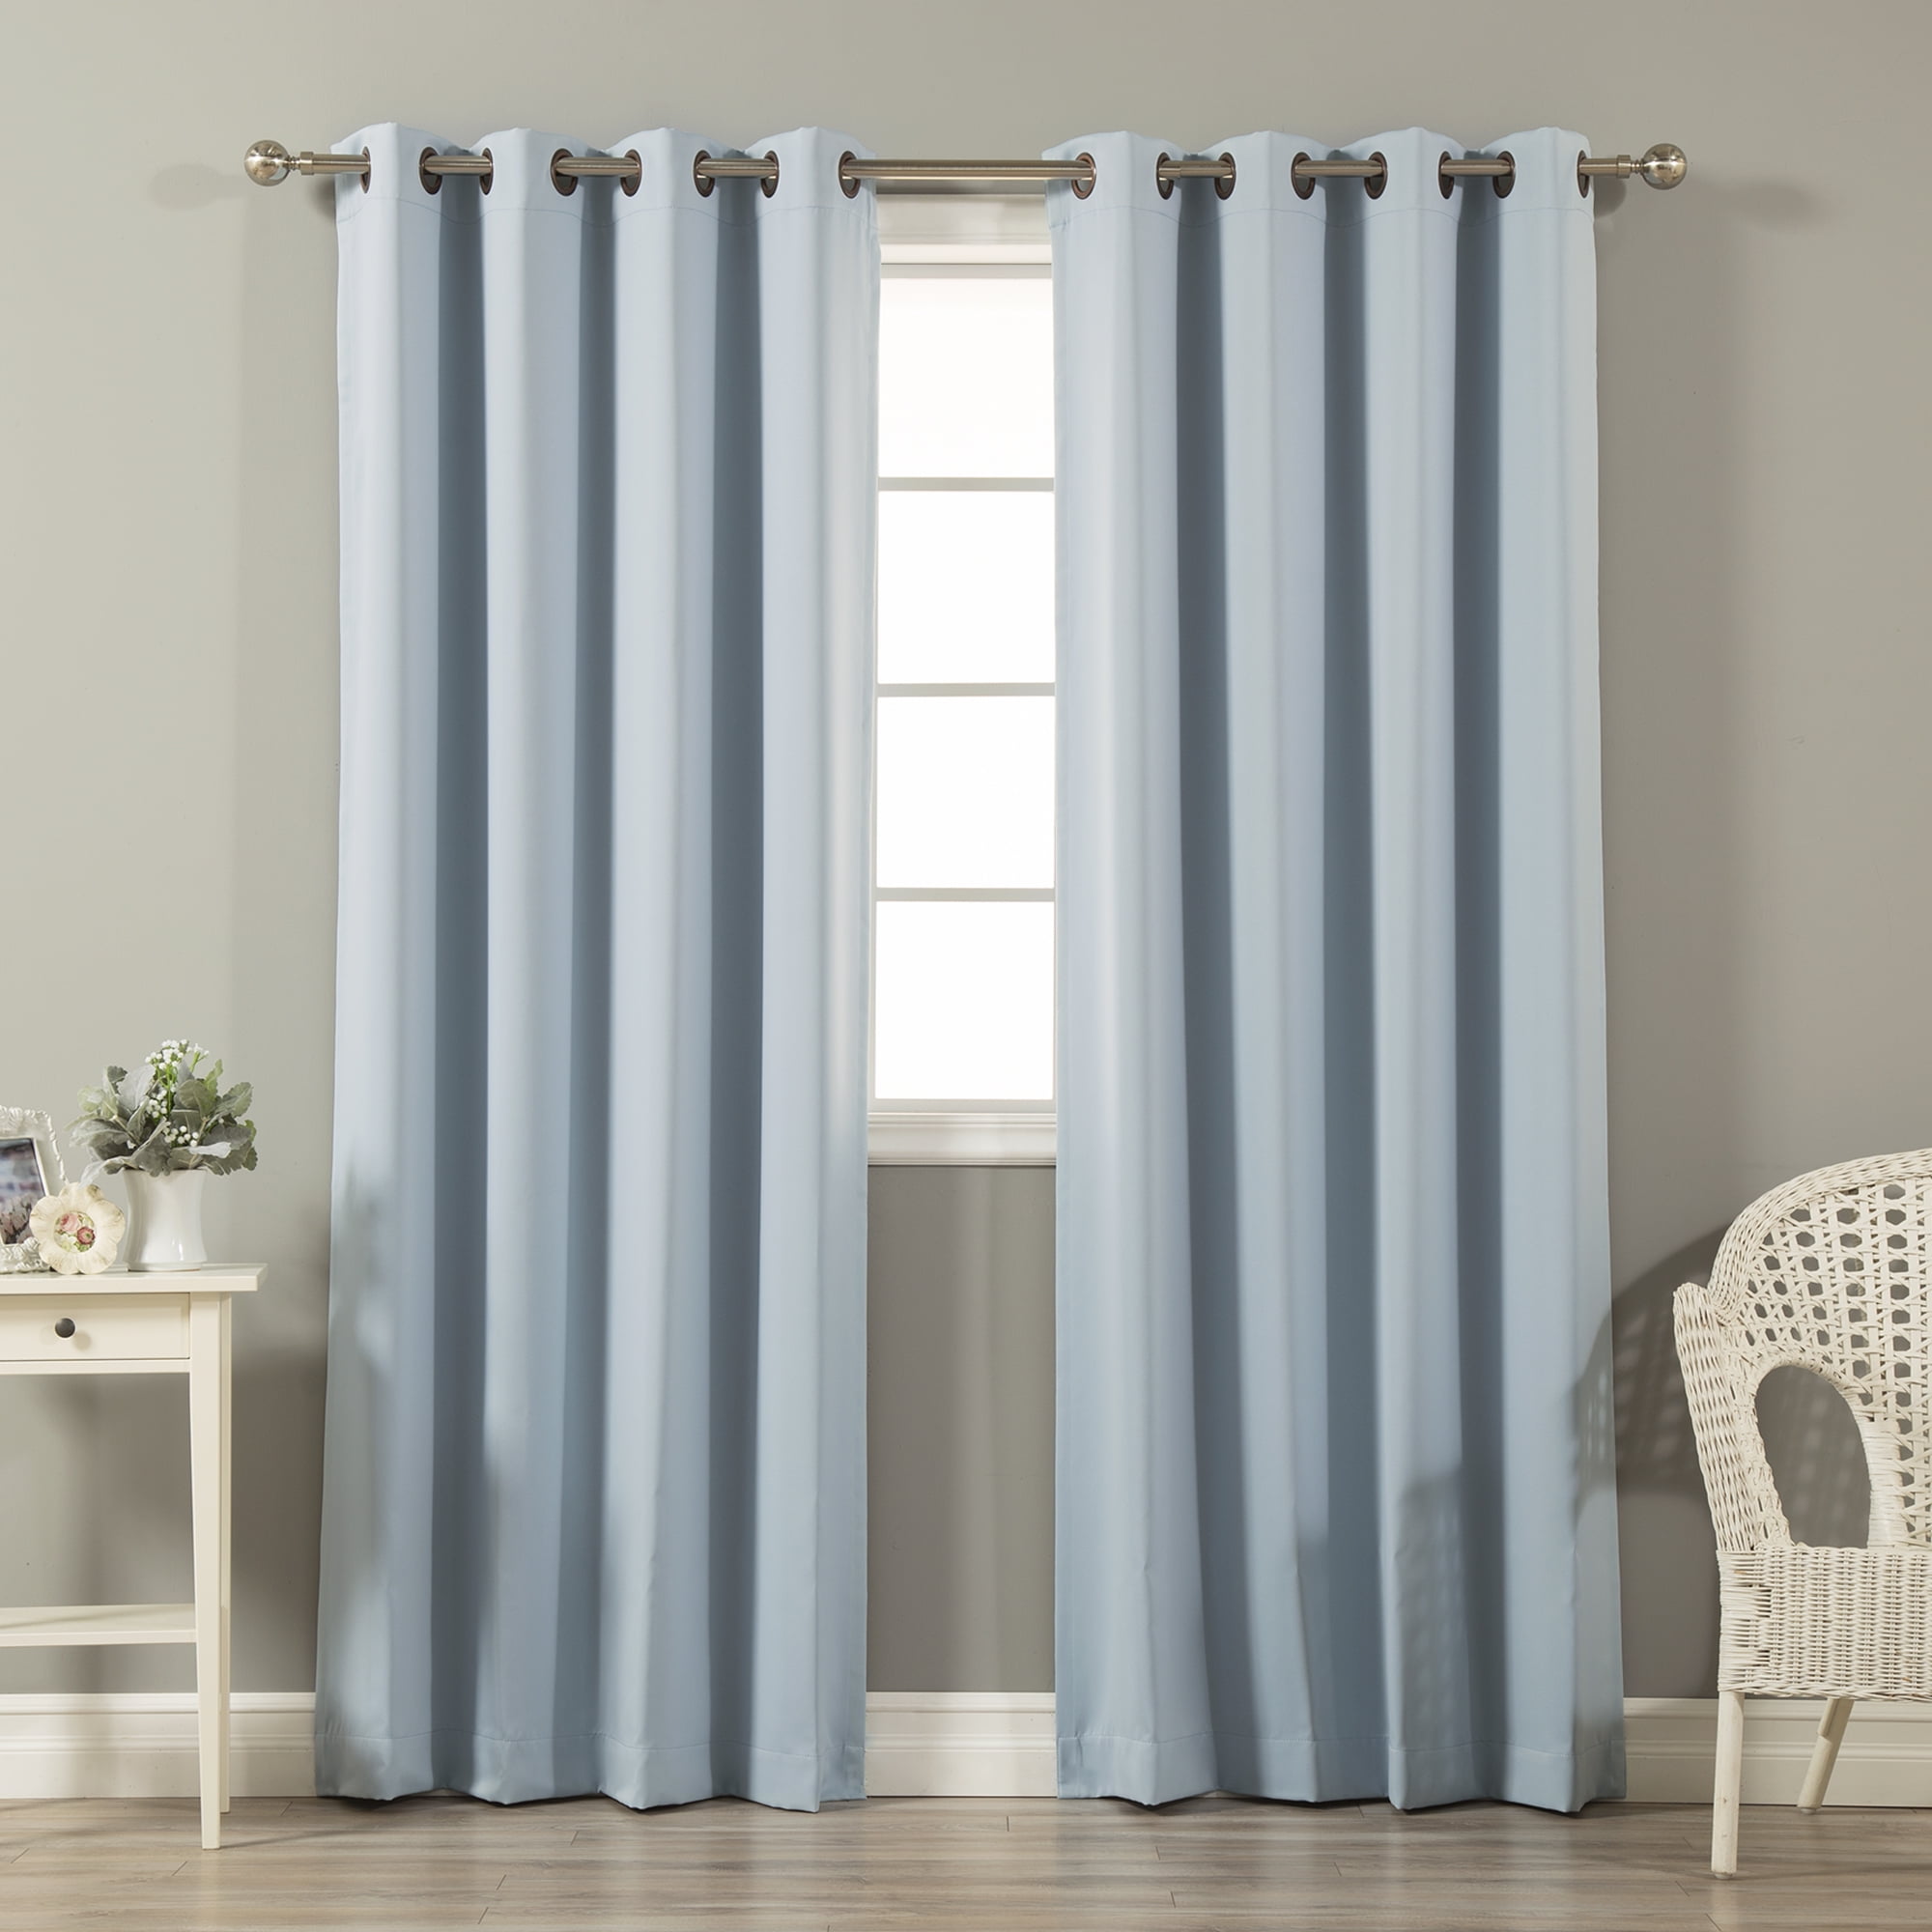 Quality Home Basic Thermal Blackout Curtains - Antique Bronze Grommet